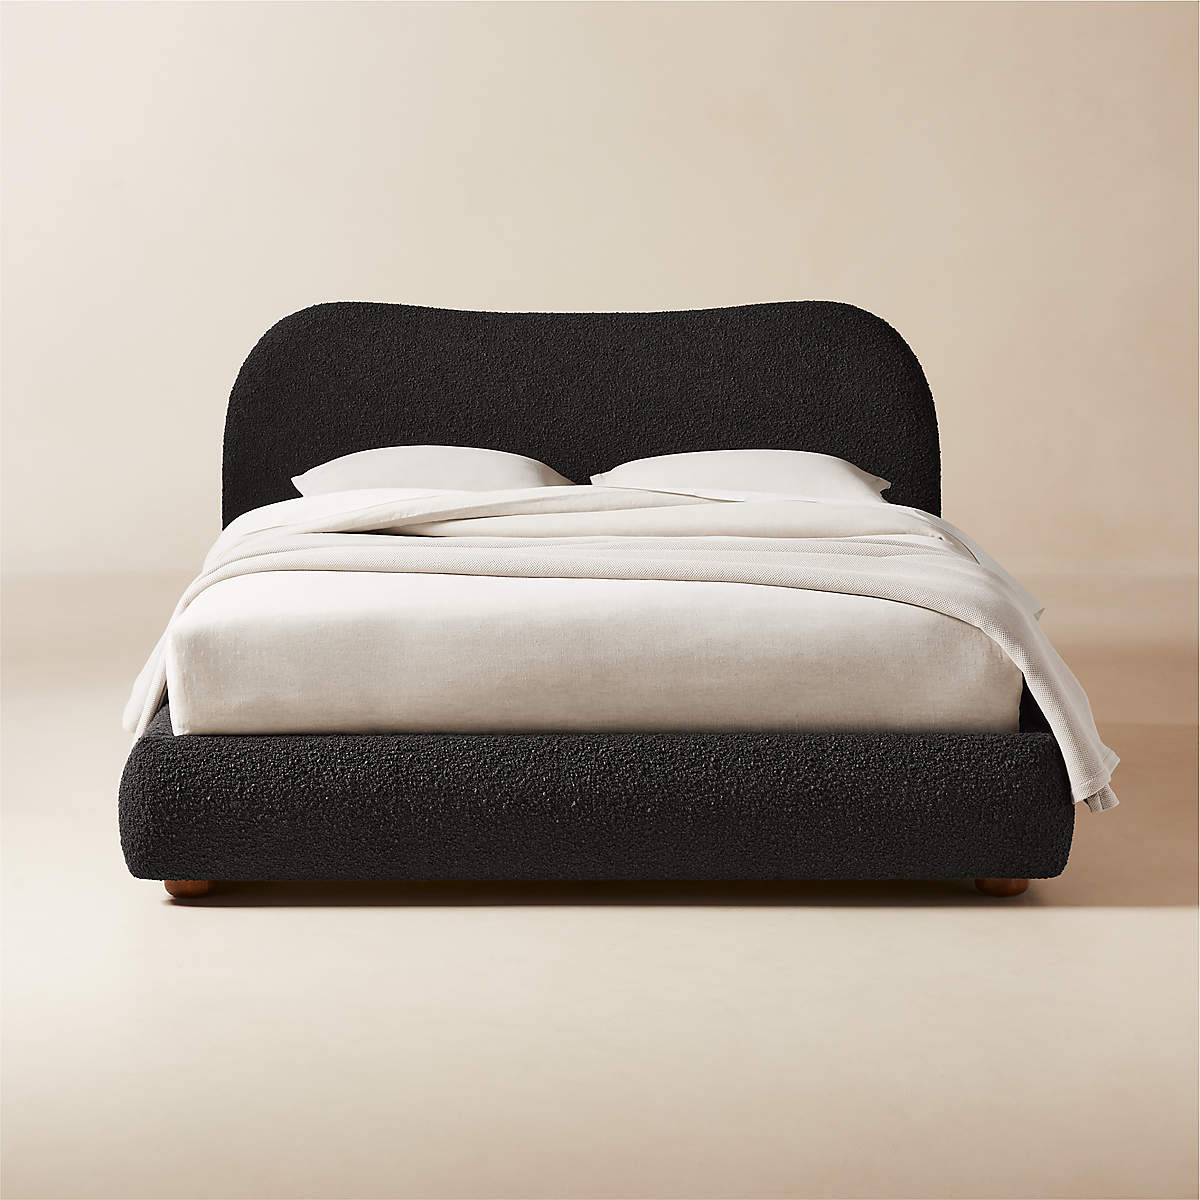 Diana Charcoal Black Upholstered Queen Bed + Reviews | CB2